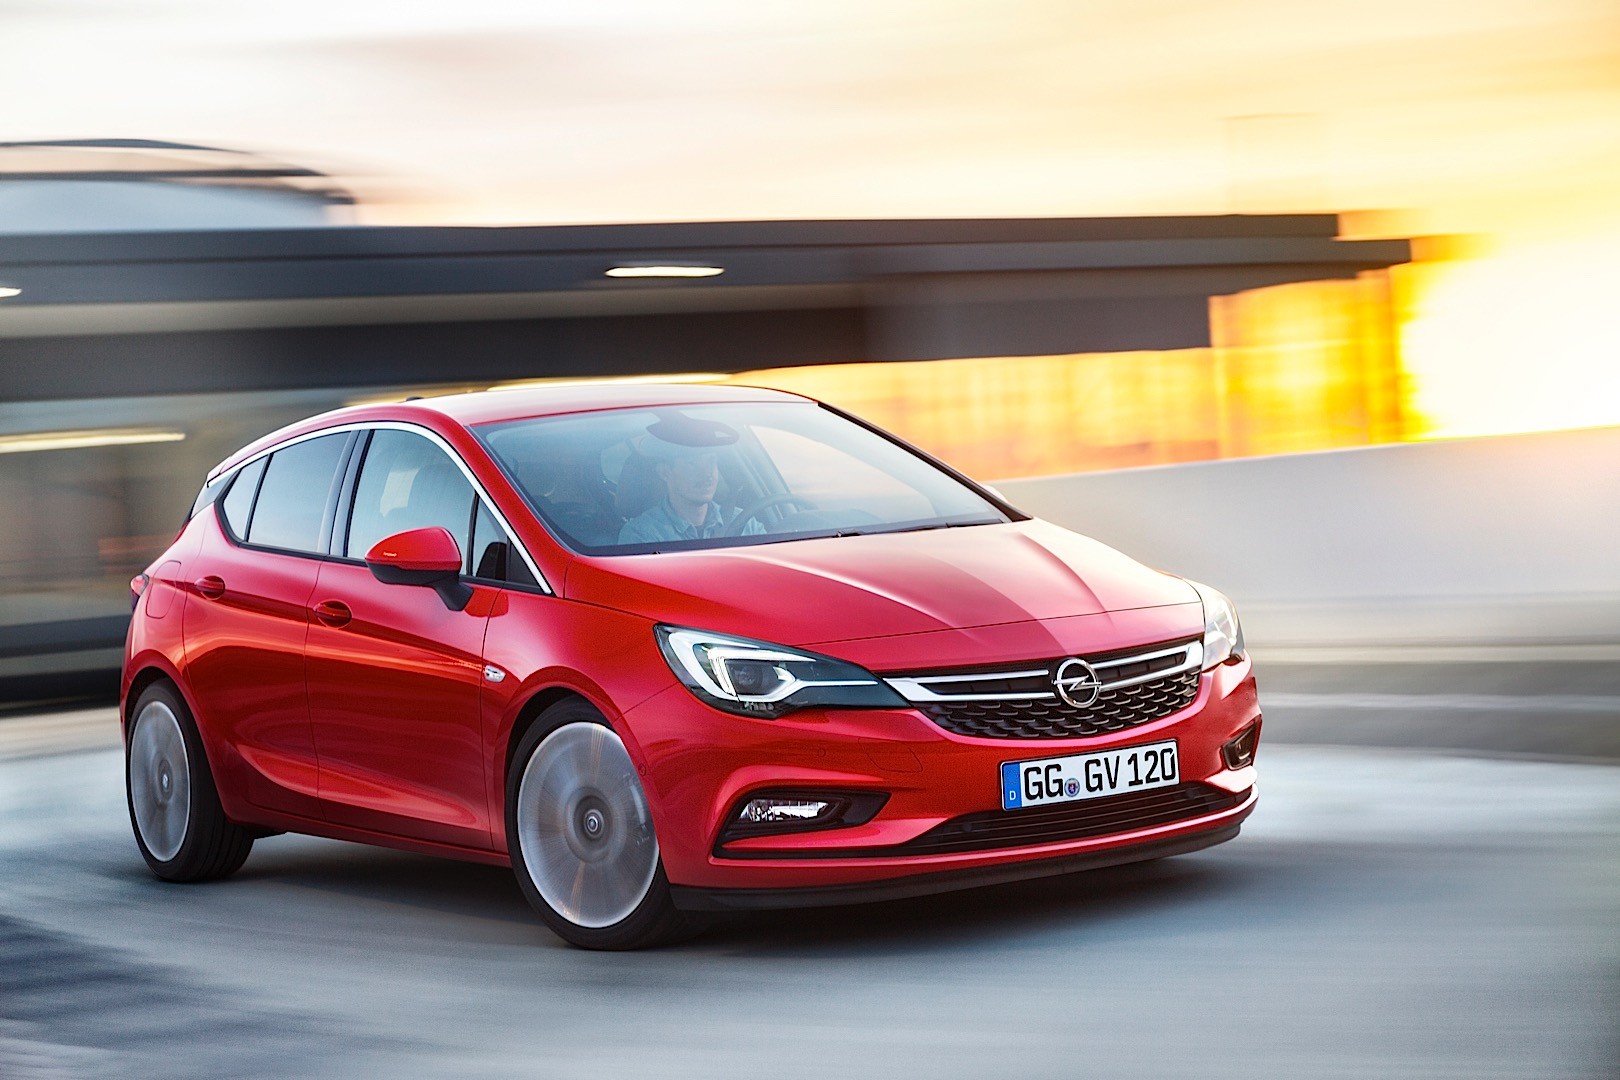 2015-opel-astra-k-is-here-to-stay-photo-gallery_9